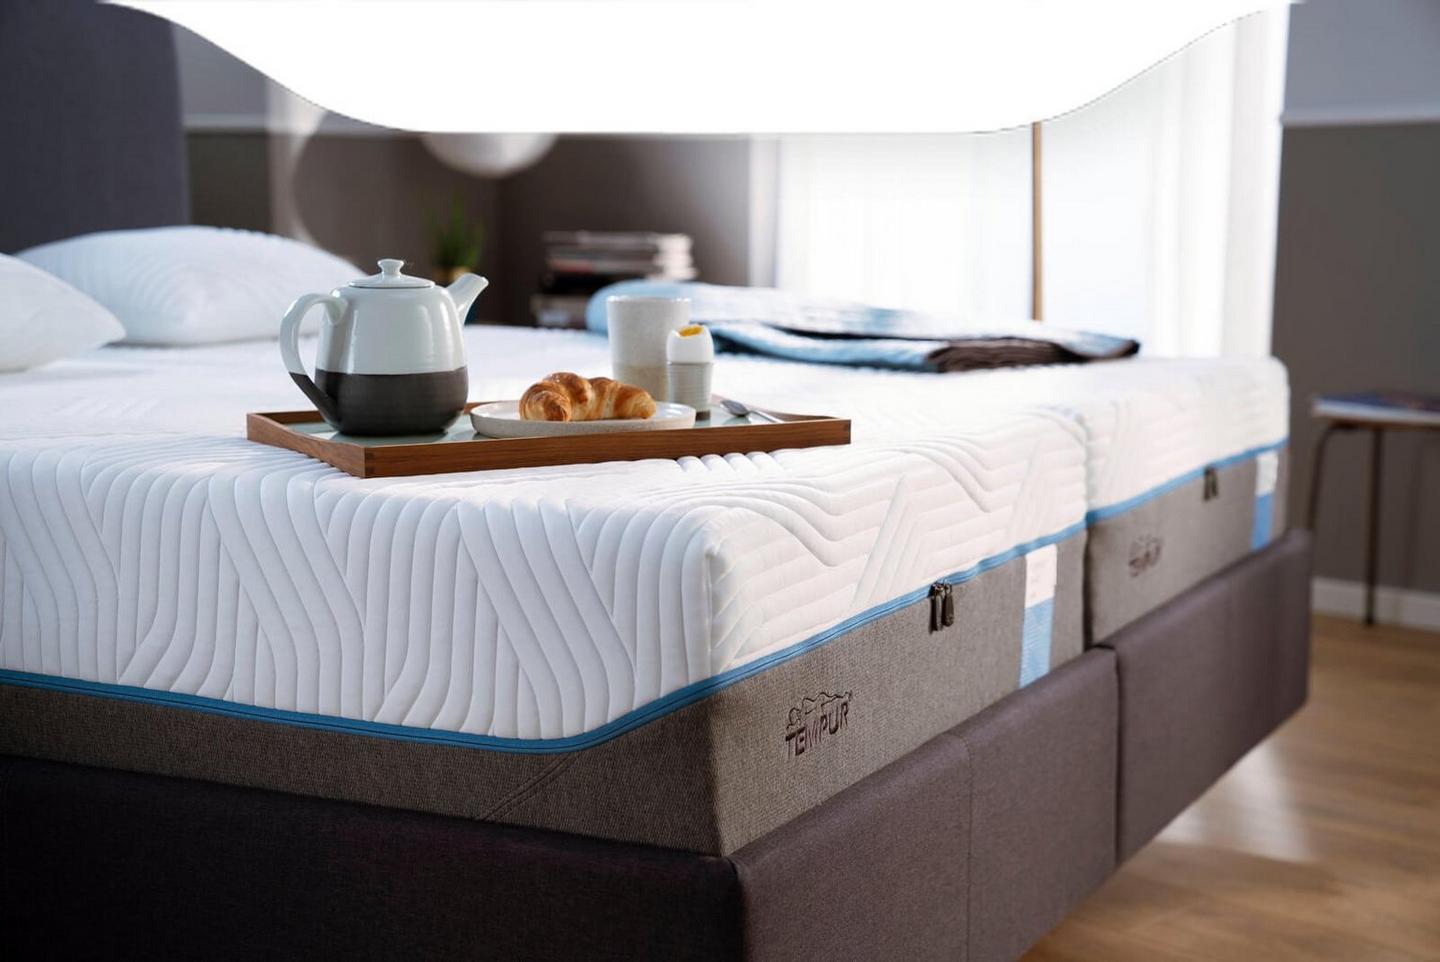 The Science of Sleep: Choosing the Perfect Mattress for Your Well-Being